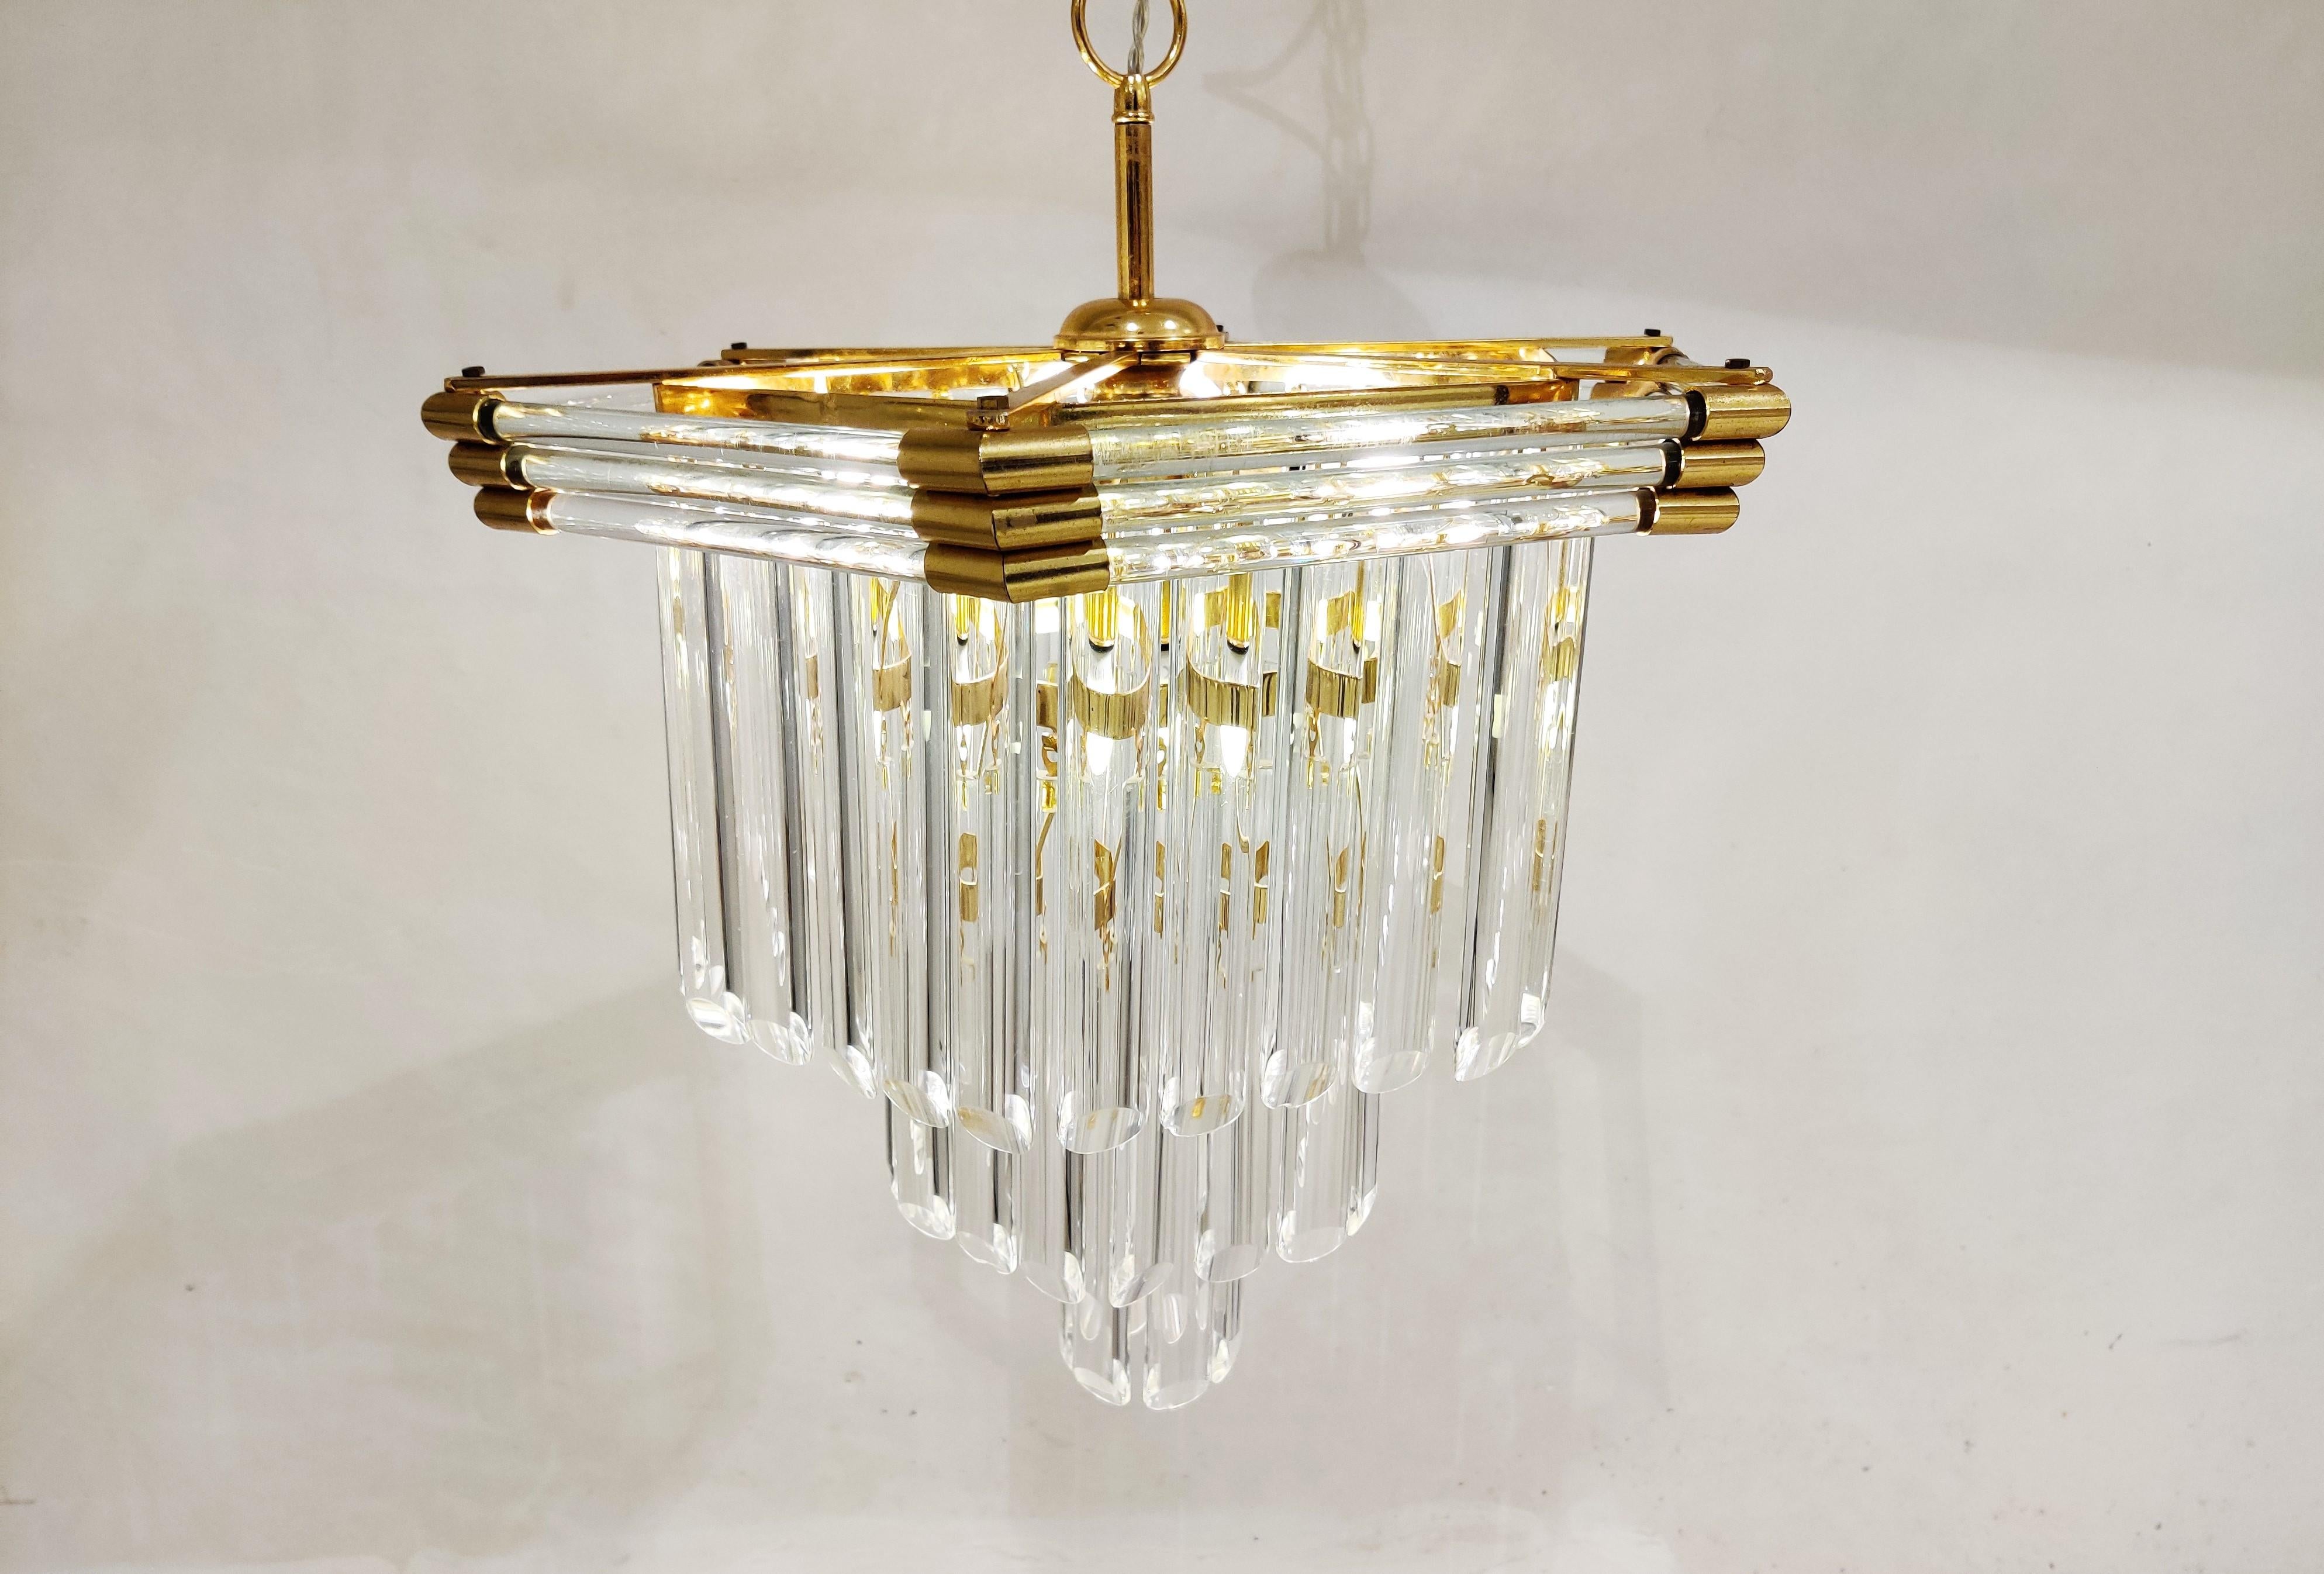 Elegant brass and cut crystal chandelier by Bakalowits & Sohne.

Hexagonal frame with clear glass tubes holding cut glass crystal rods.

The chandelier emits a stunning light.

The lamp is fitted with 3 E27 light sockets.

1980s -